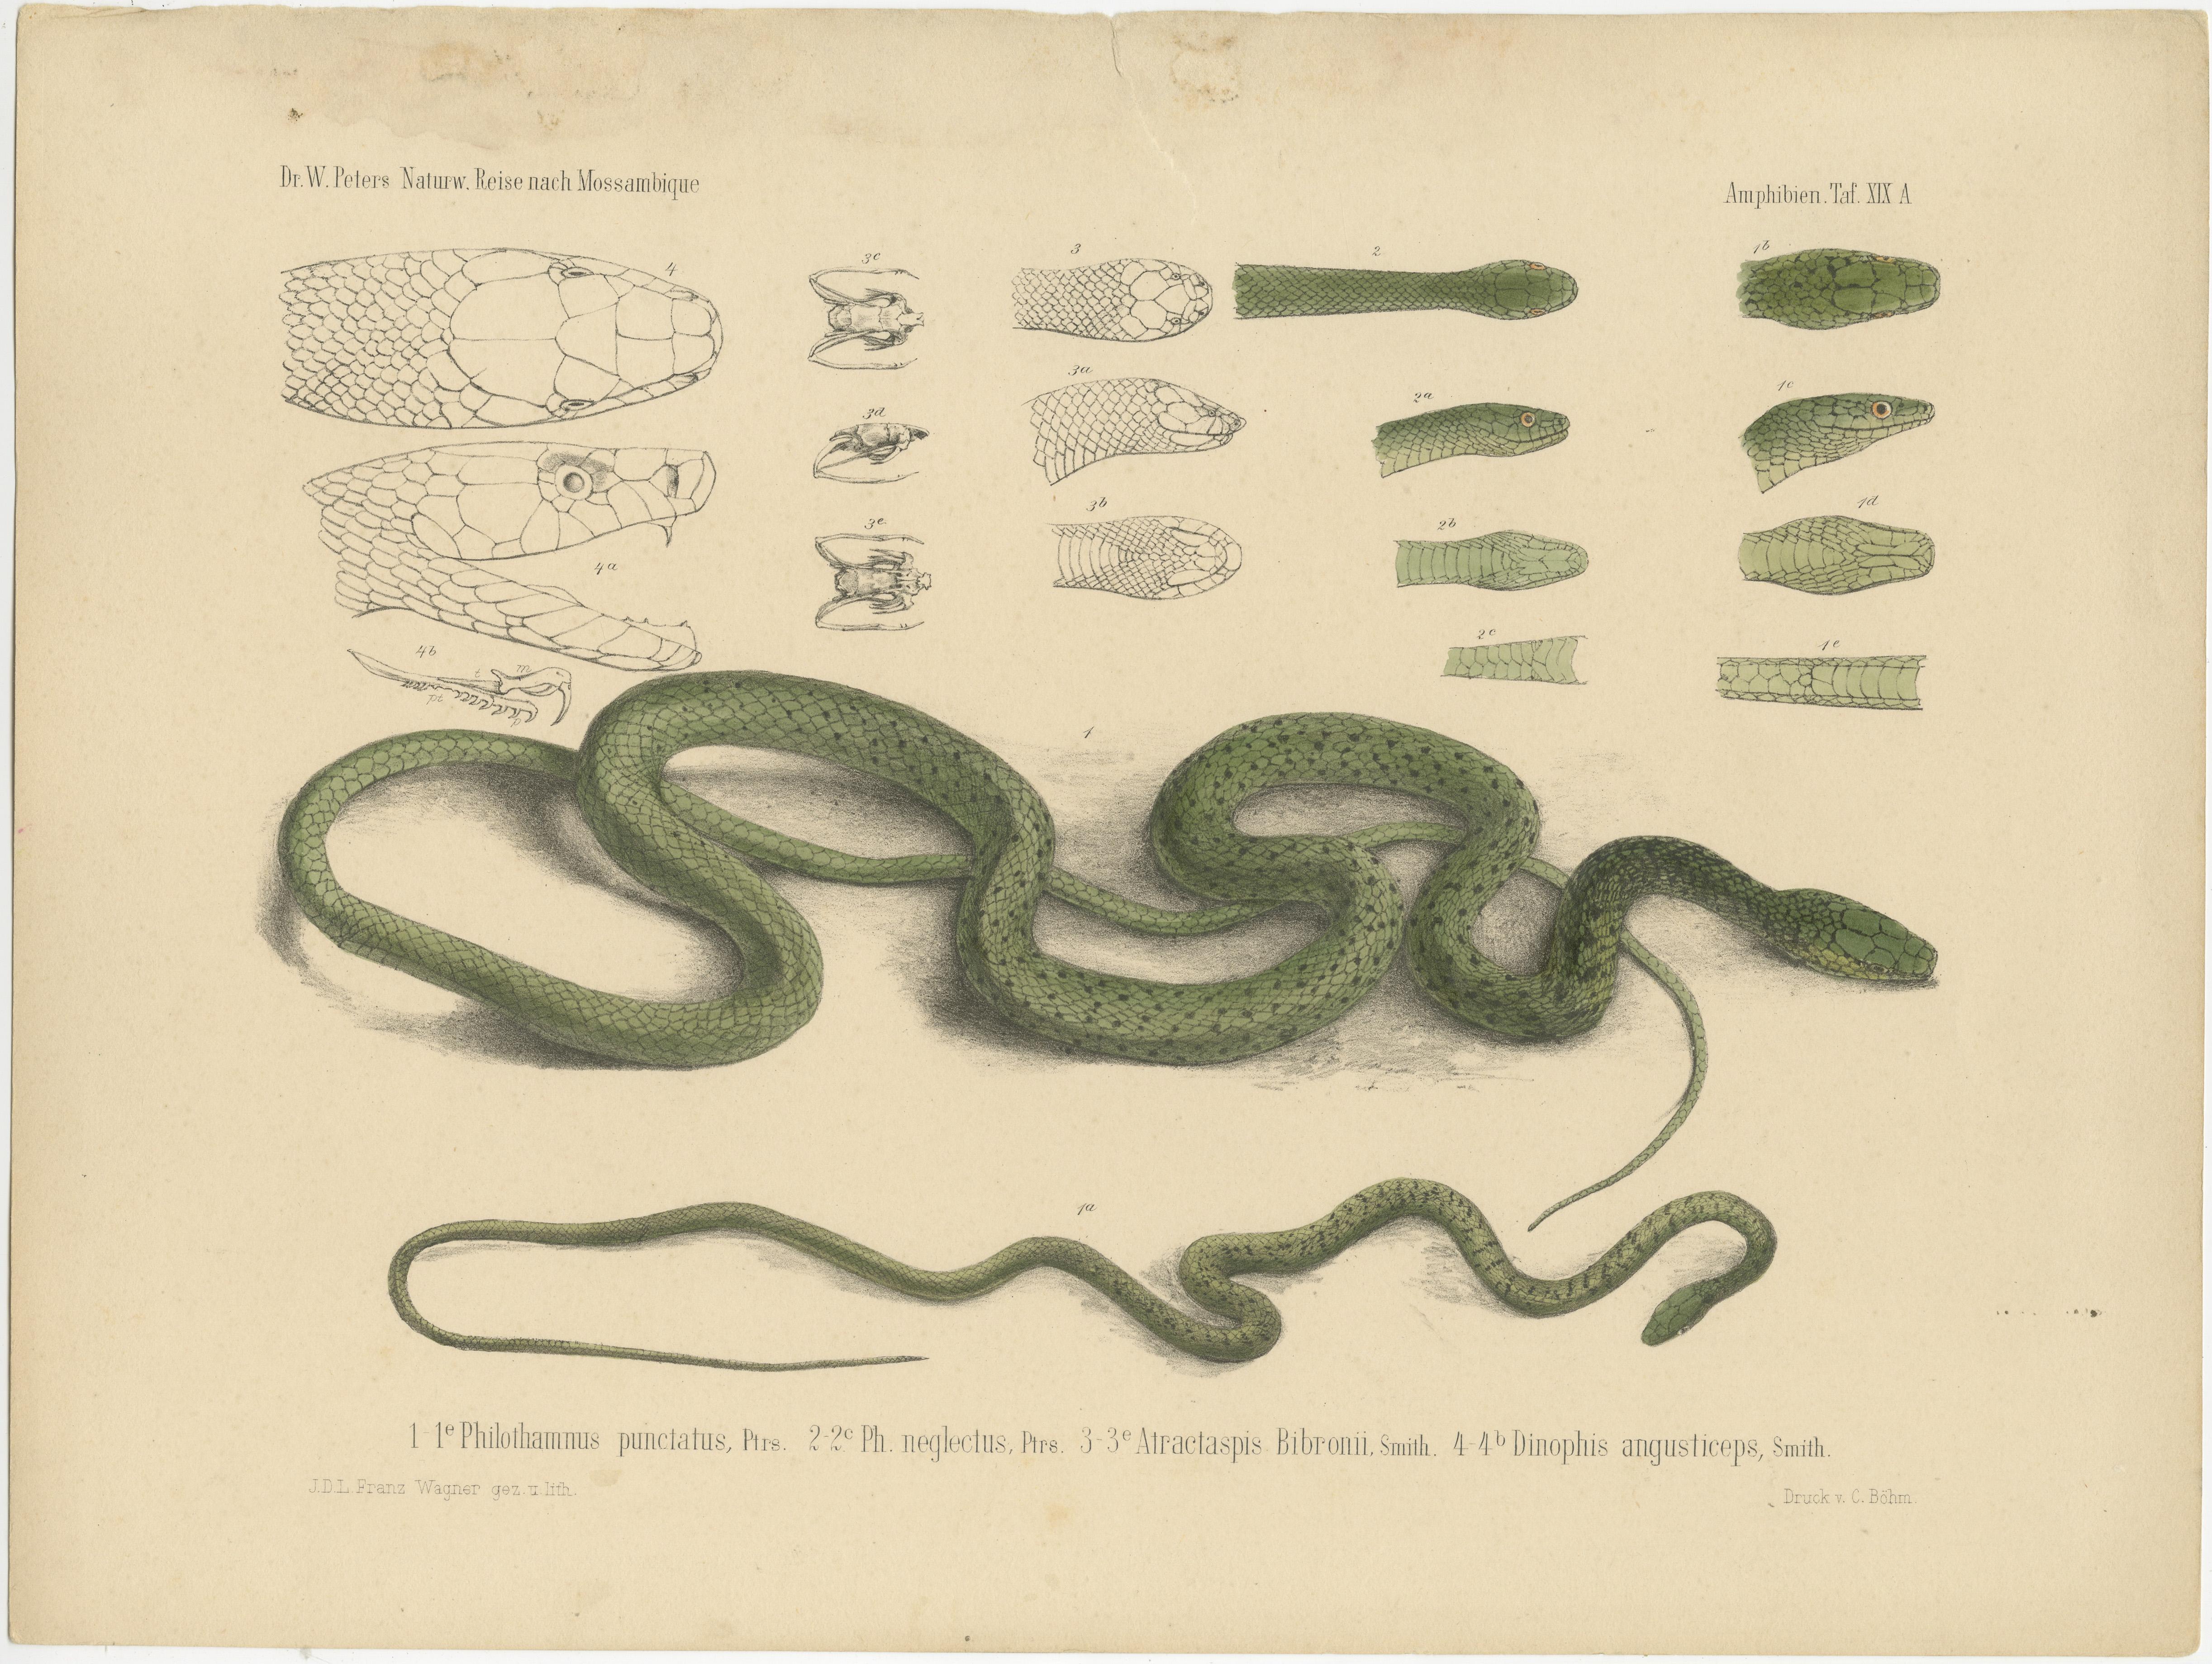 Antique print titled 'Philothamnus punctatus, Ph. neglectus (..)'. Original antique print of Philothamnus and other snake species. This print originates from 'Naturwissenschaftliche Reise nach Mossambique (..)' by Wilhelm C.H. Peters, published